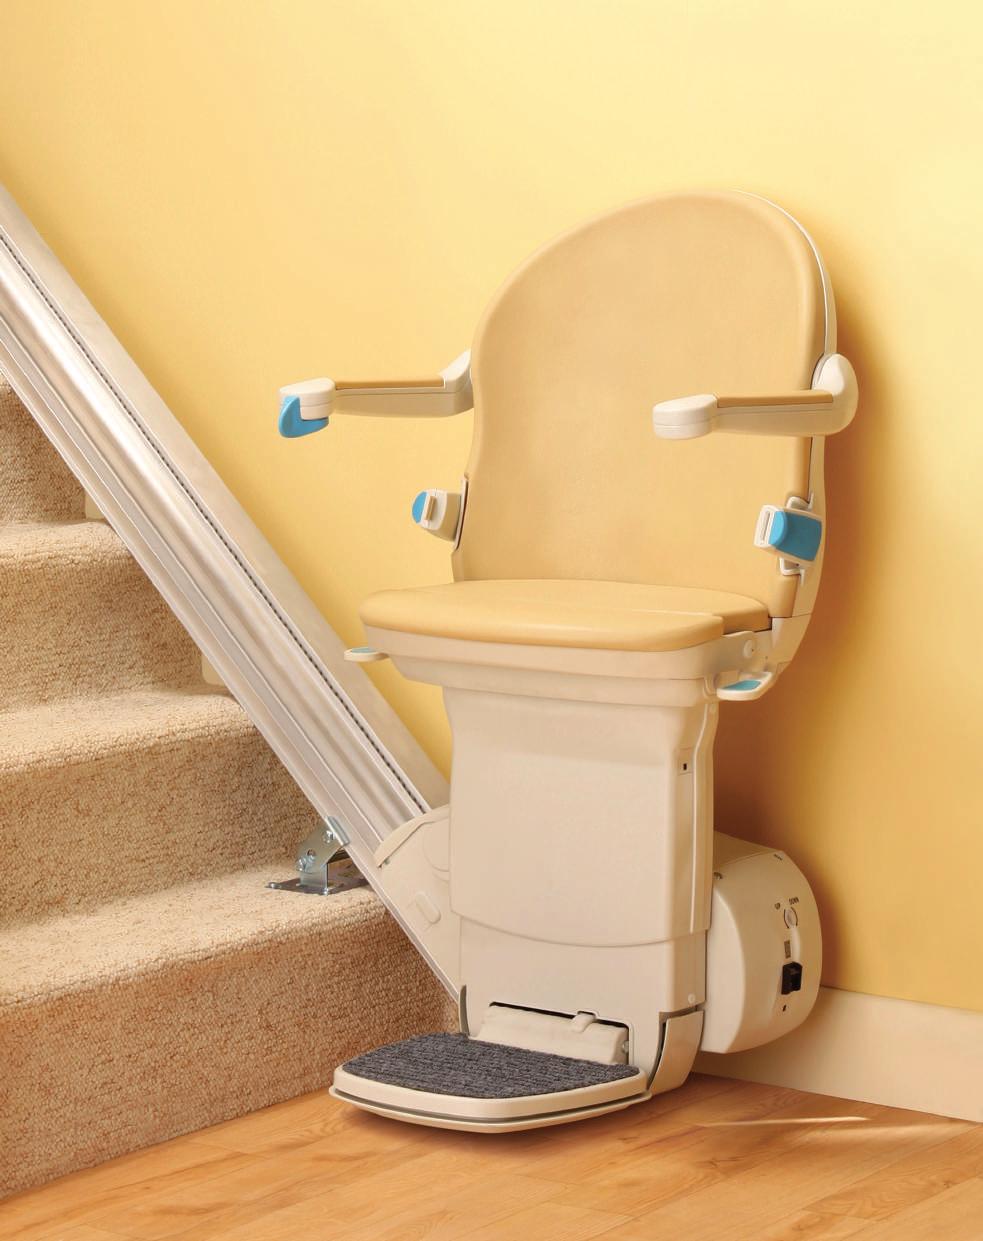 Simplicity+ Straight stairlift For those requiring full powered options, the Simplicity+ is a stylish solution that overcomes the challenges of climbing straight stairs.